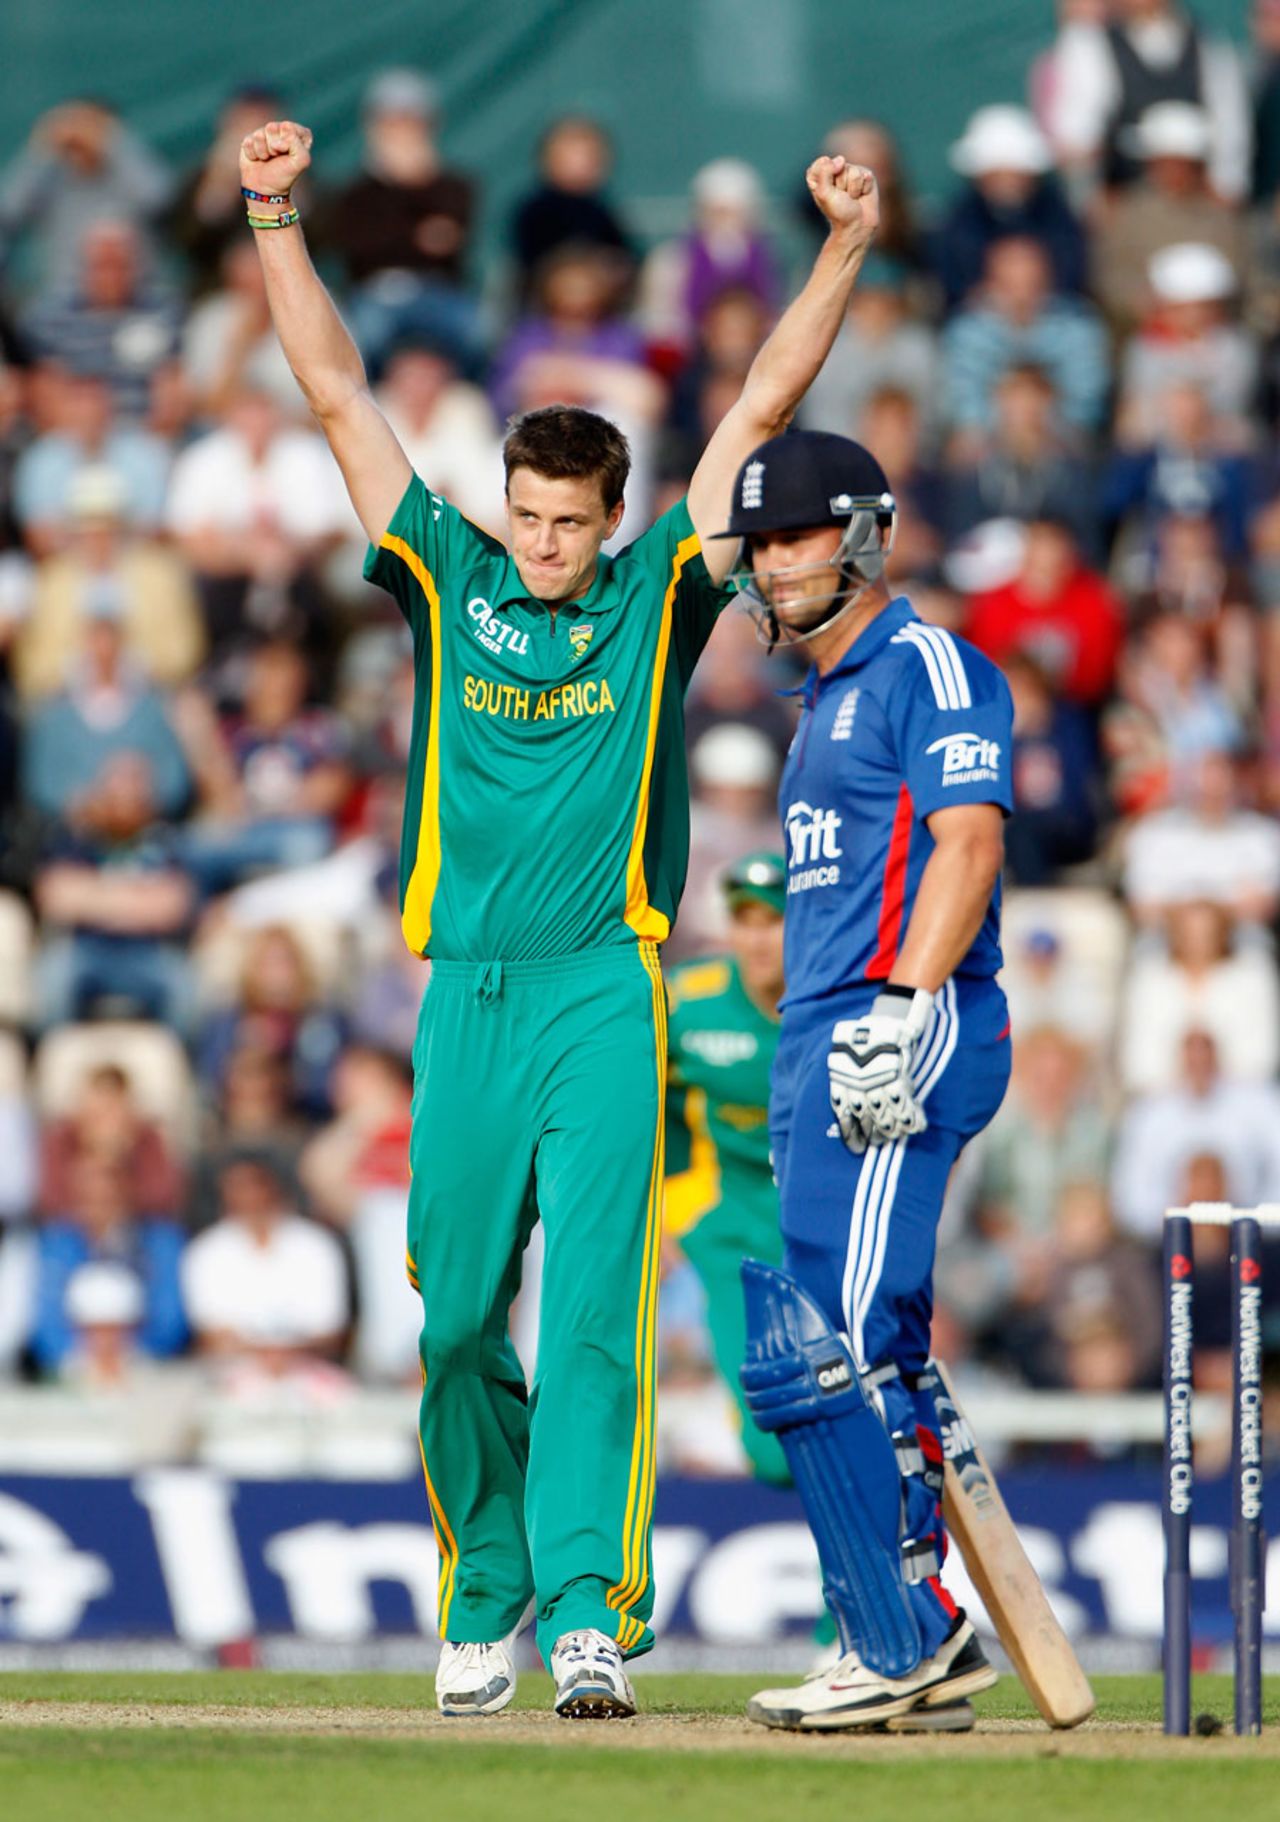 Morne Morkel had Jonathan Trott caught at long leg, England v South Africa, 2nd NatWest ODI, West End, August 28, 2012